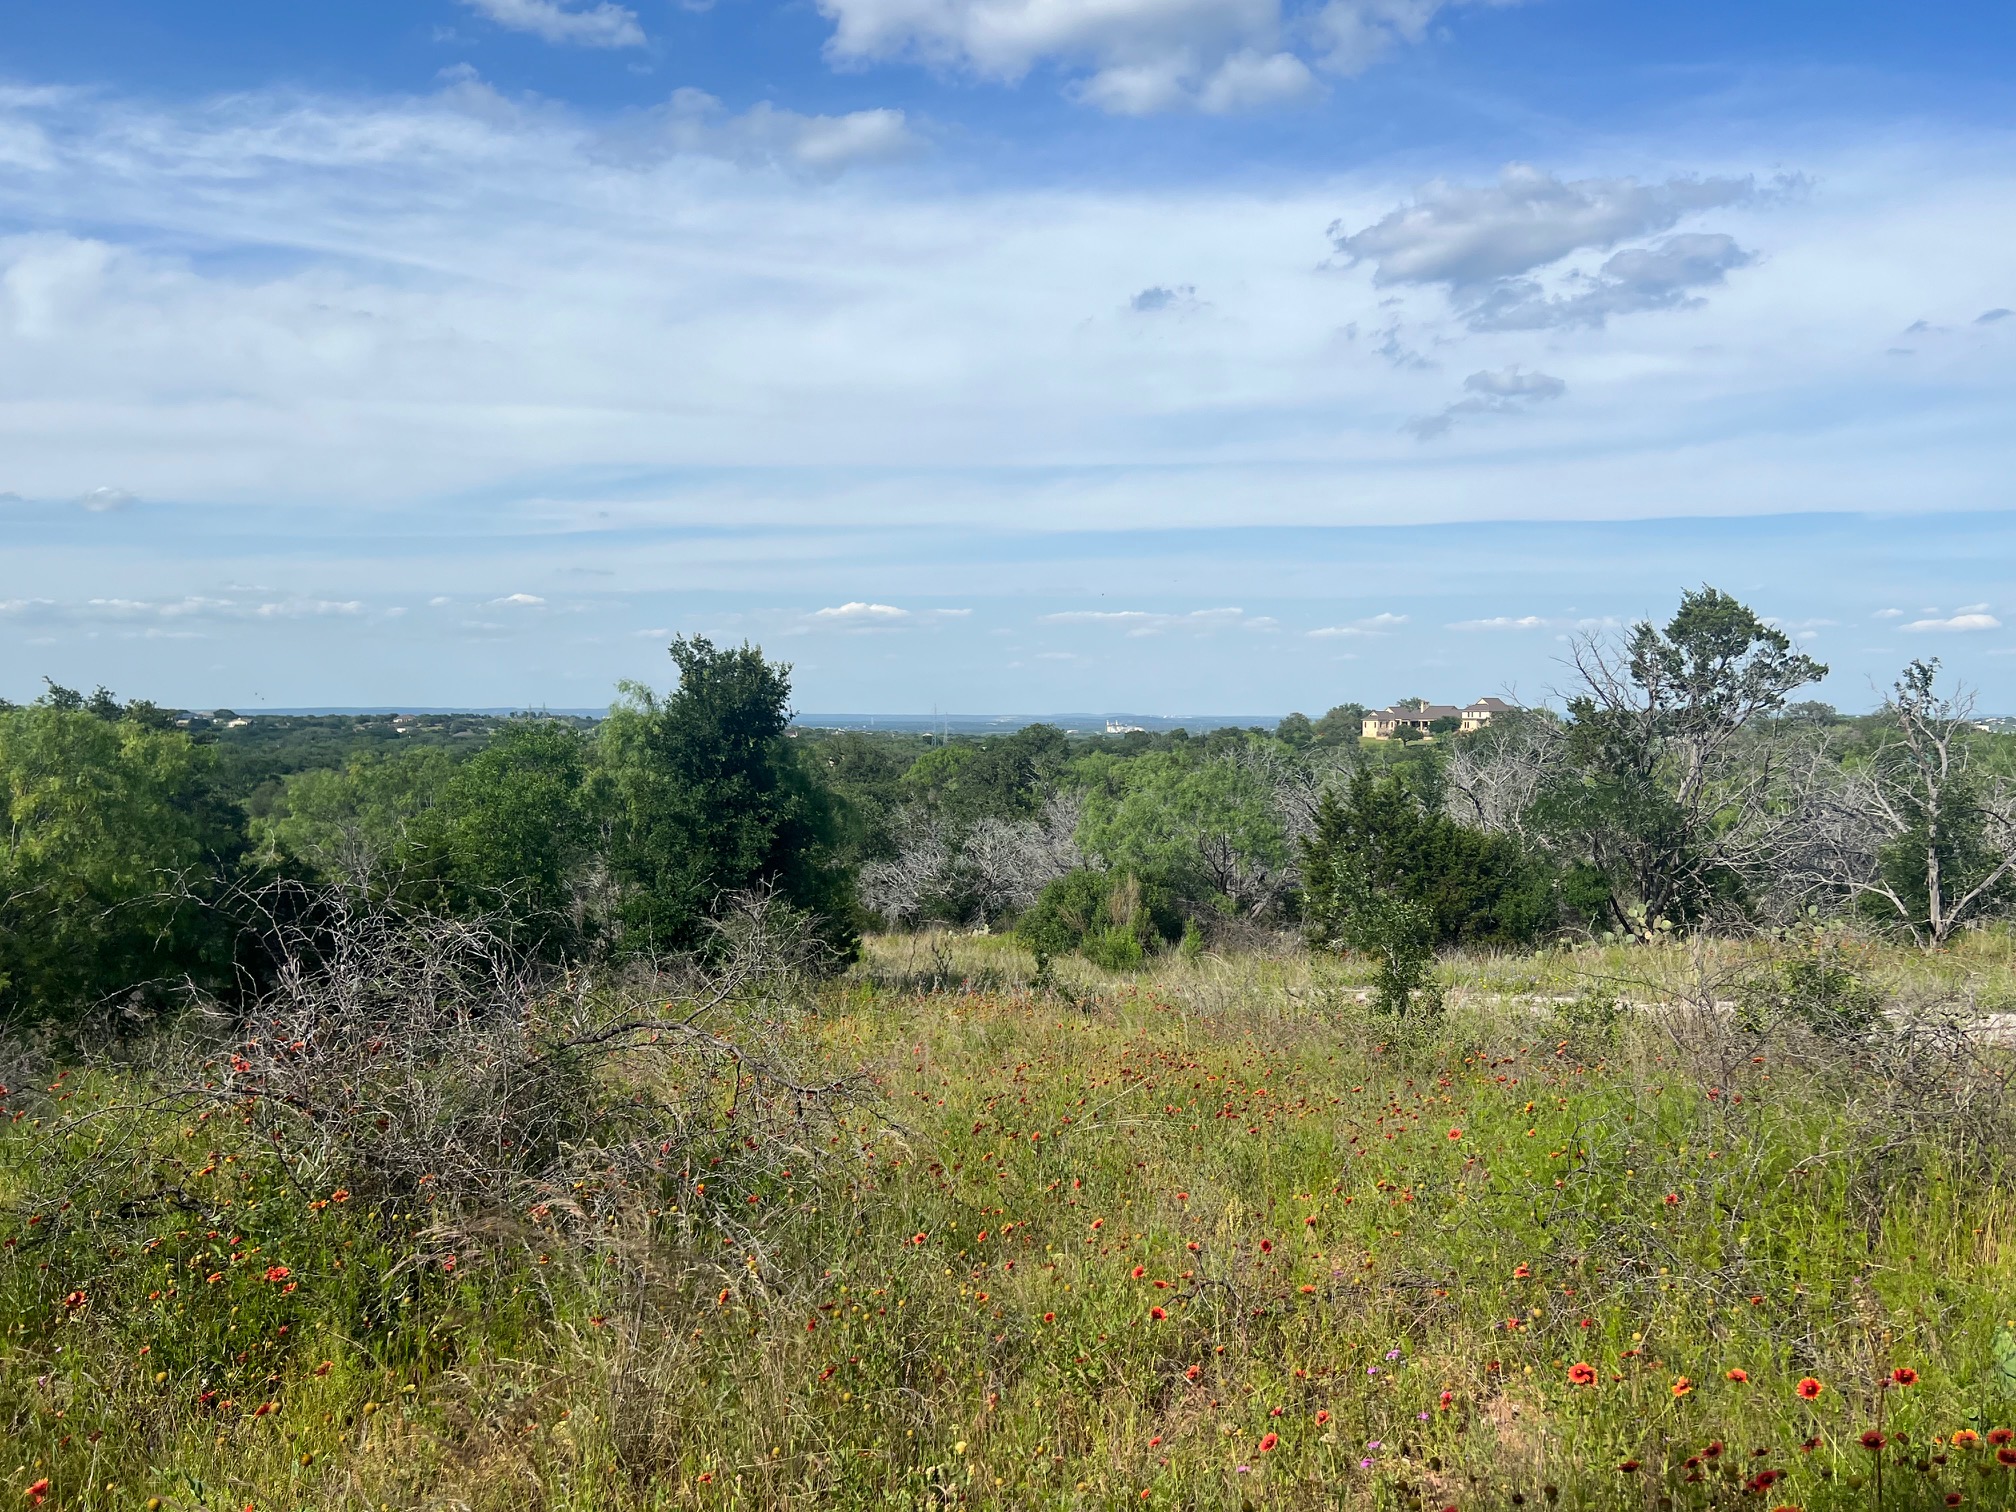 Scenic view of the horizon with trees and wildflowers in the foreground in Horseshoe Bay, Texas. 